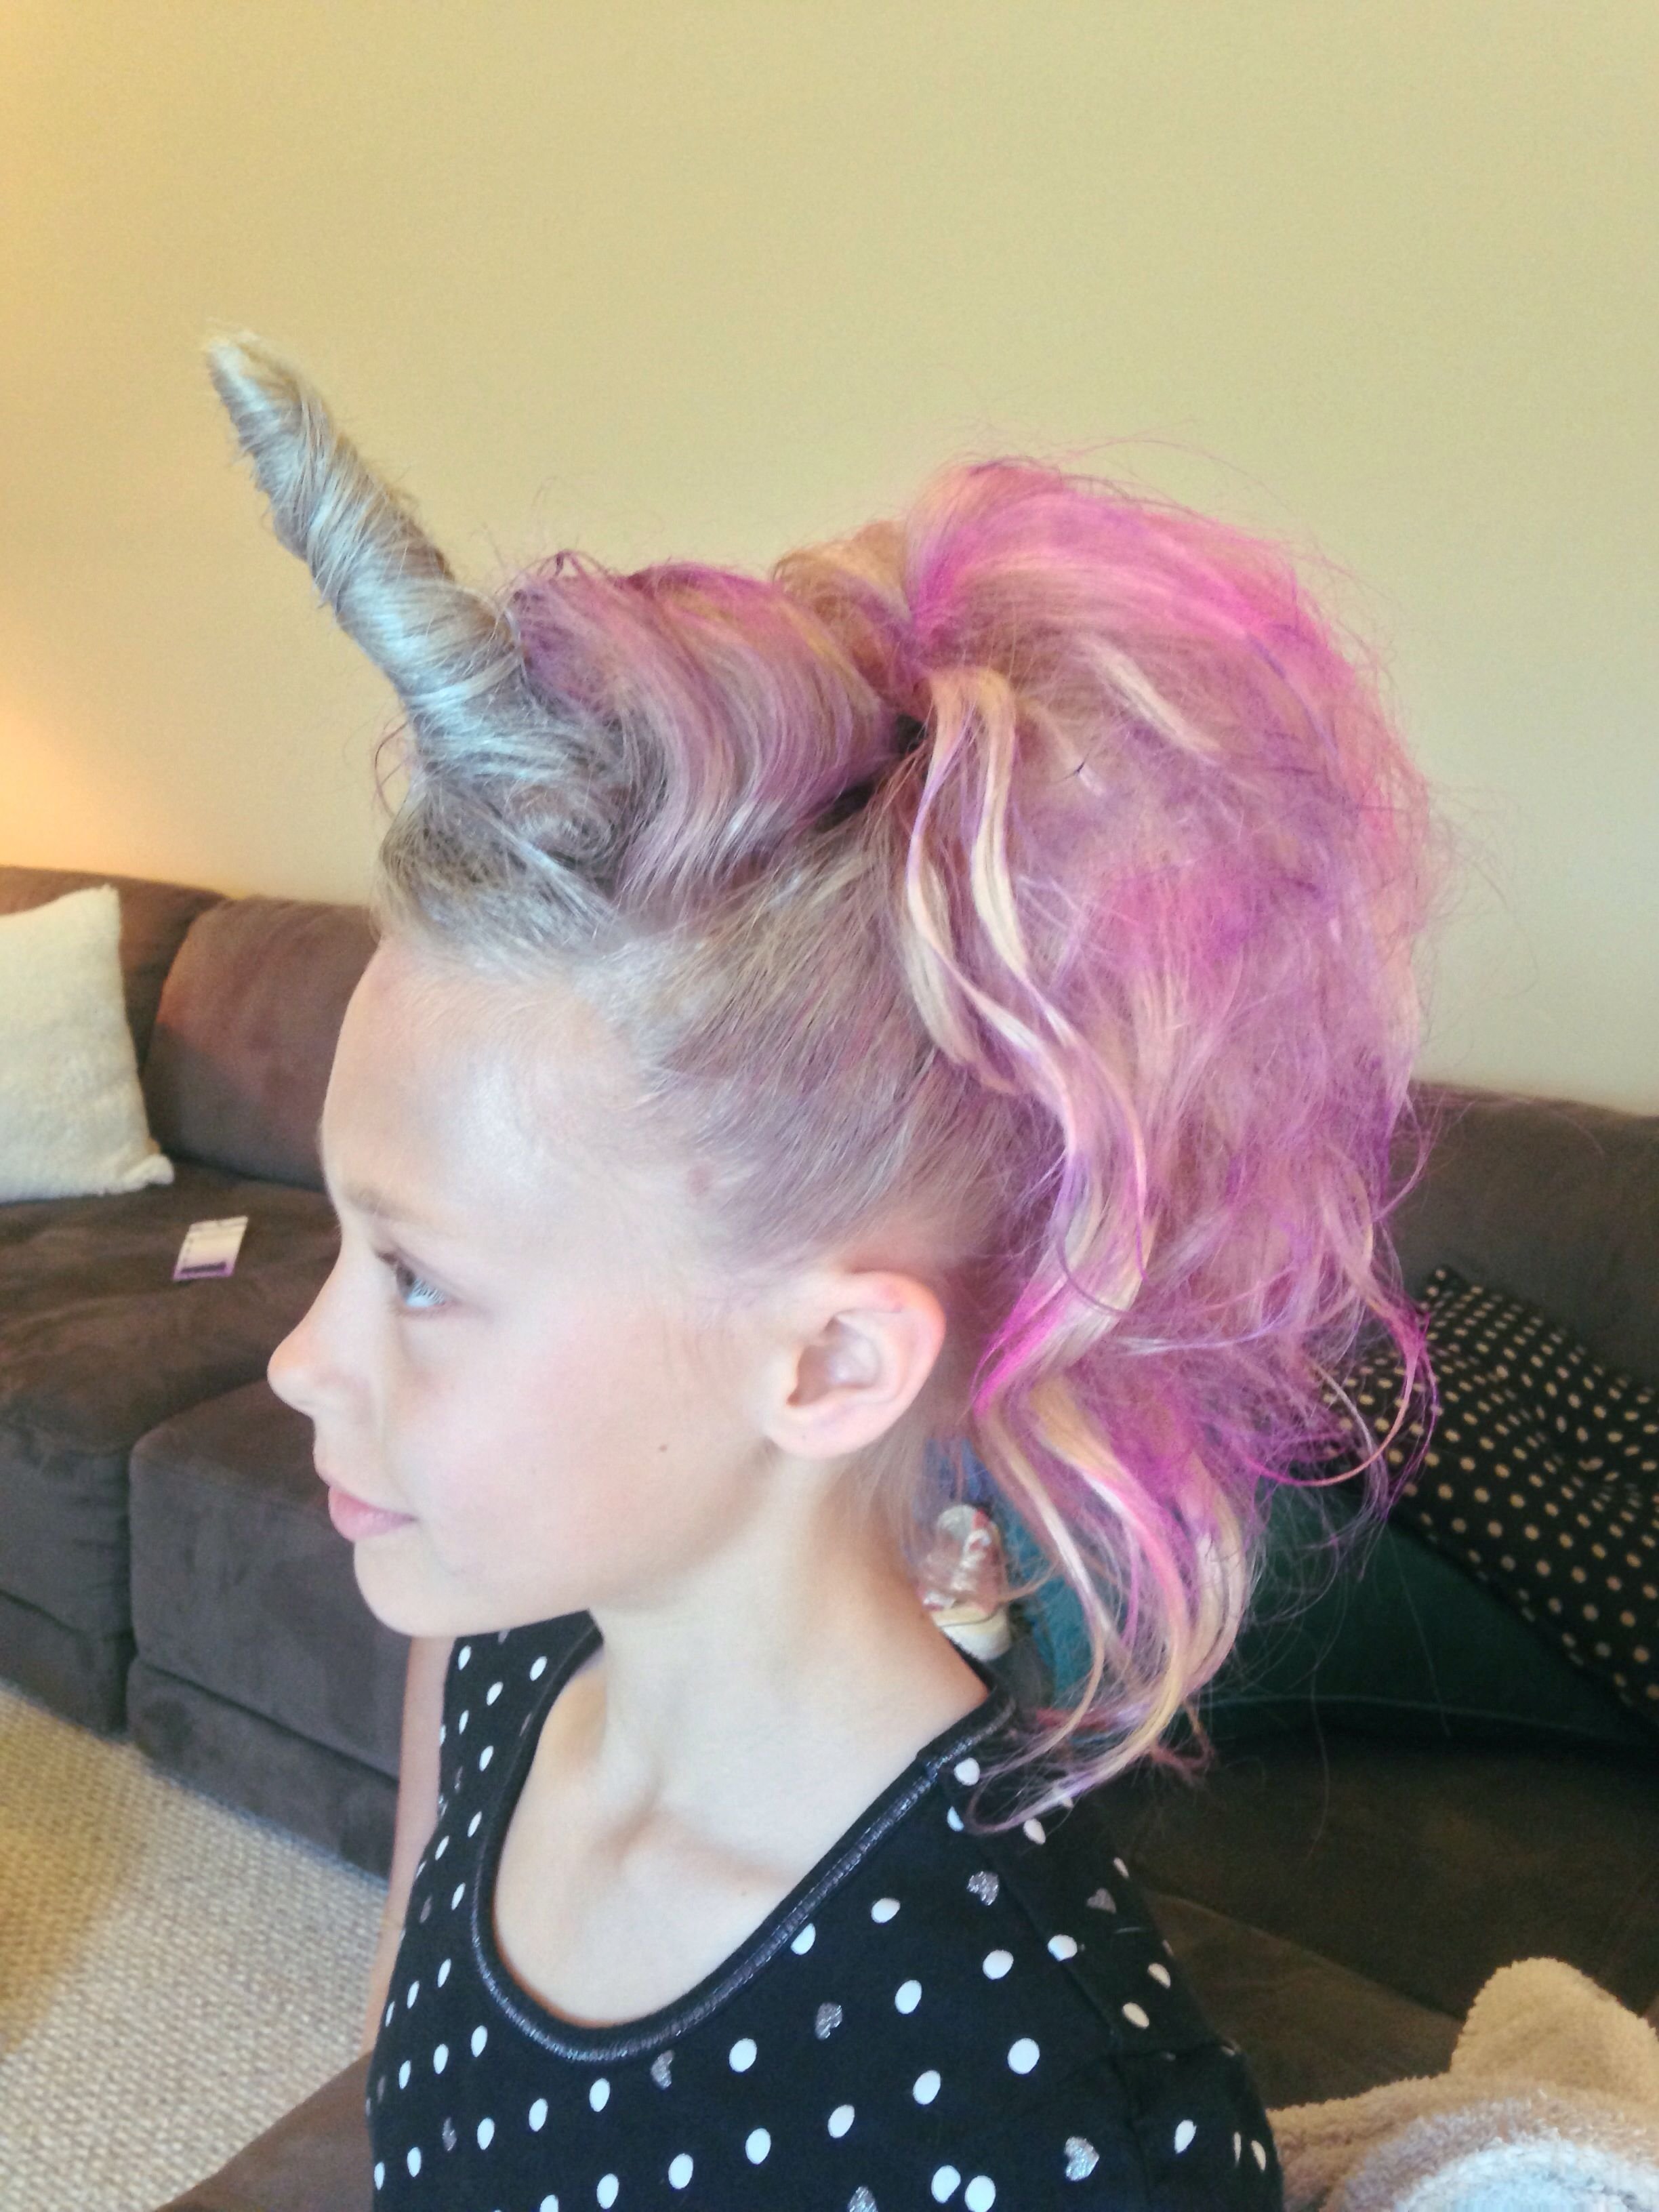 10 Fashionable Crazy Hair Day Ideas For Girls 18 crazy hair day ideas for girls boys crazy hair pony hair and 2022